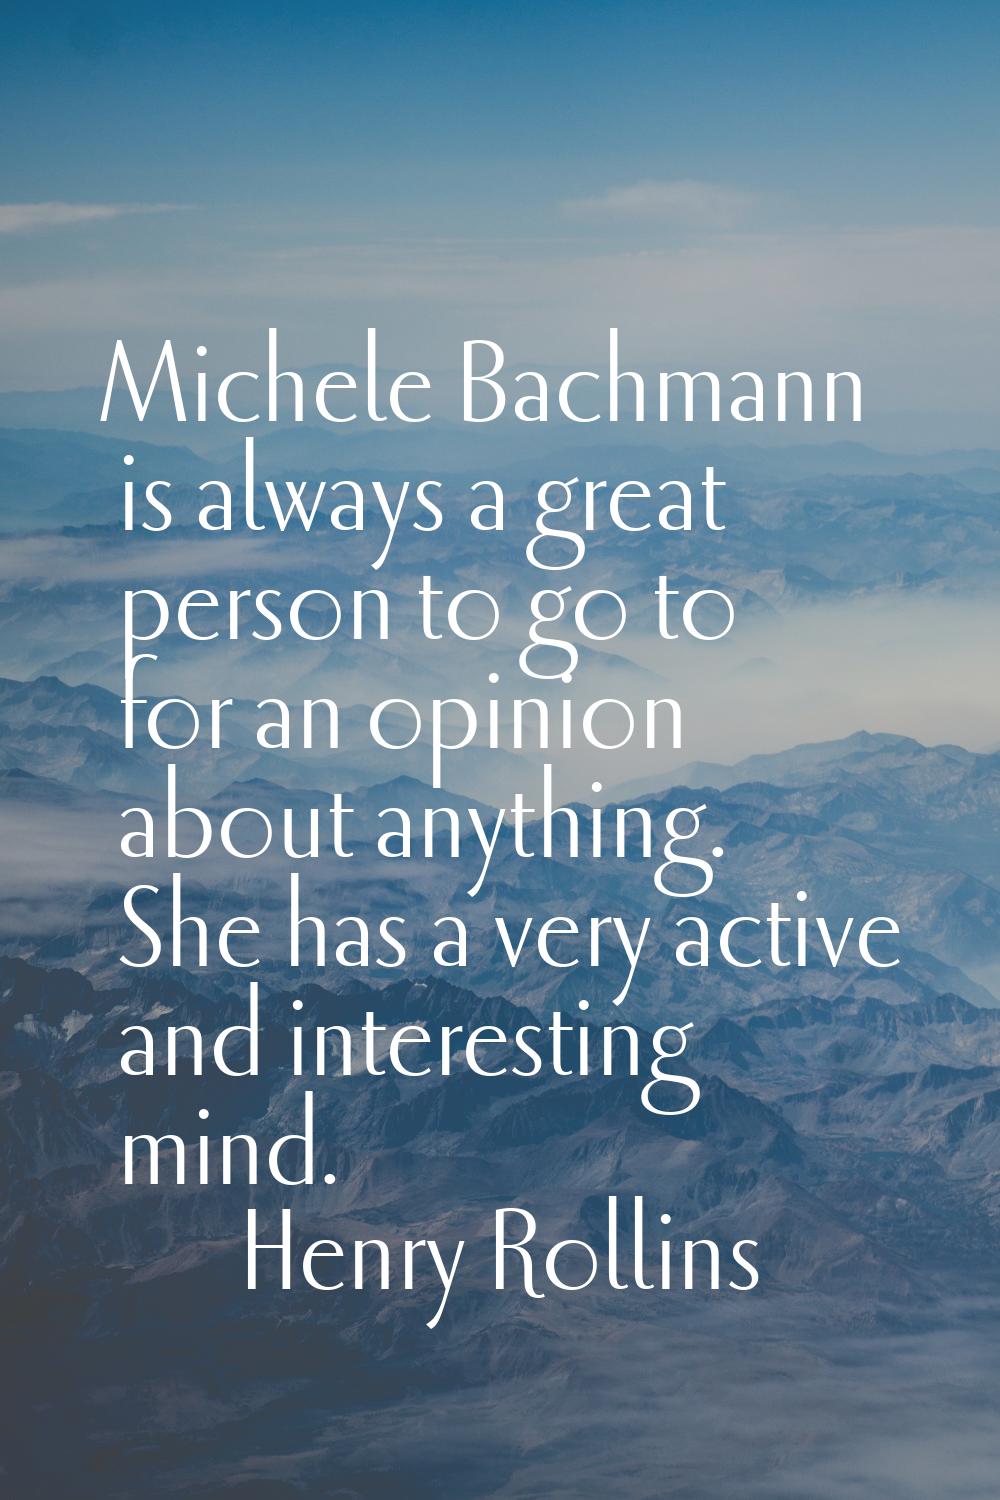 Michele Bachmann is always a great person to go to for an opinion about anything. She has a very ac